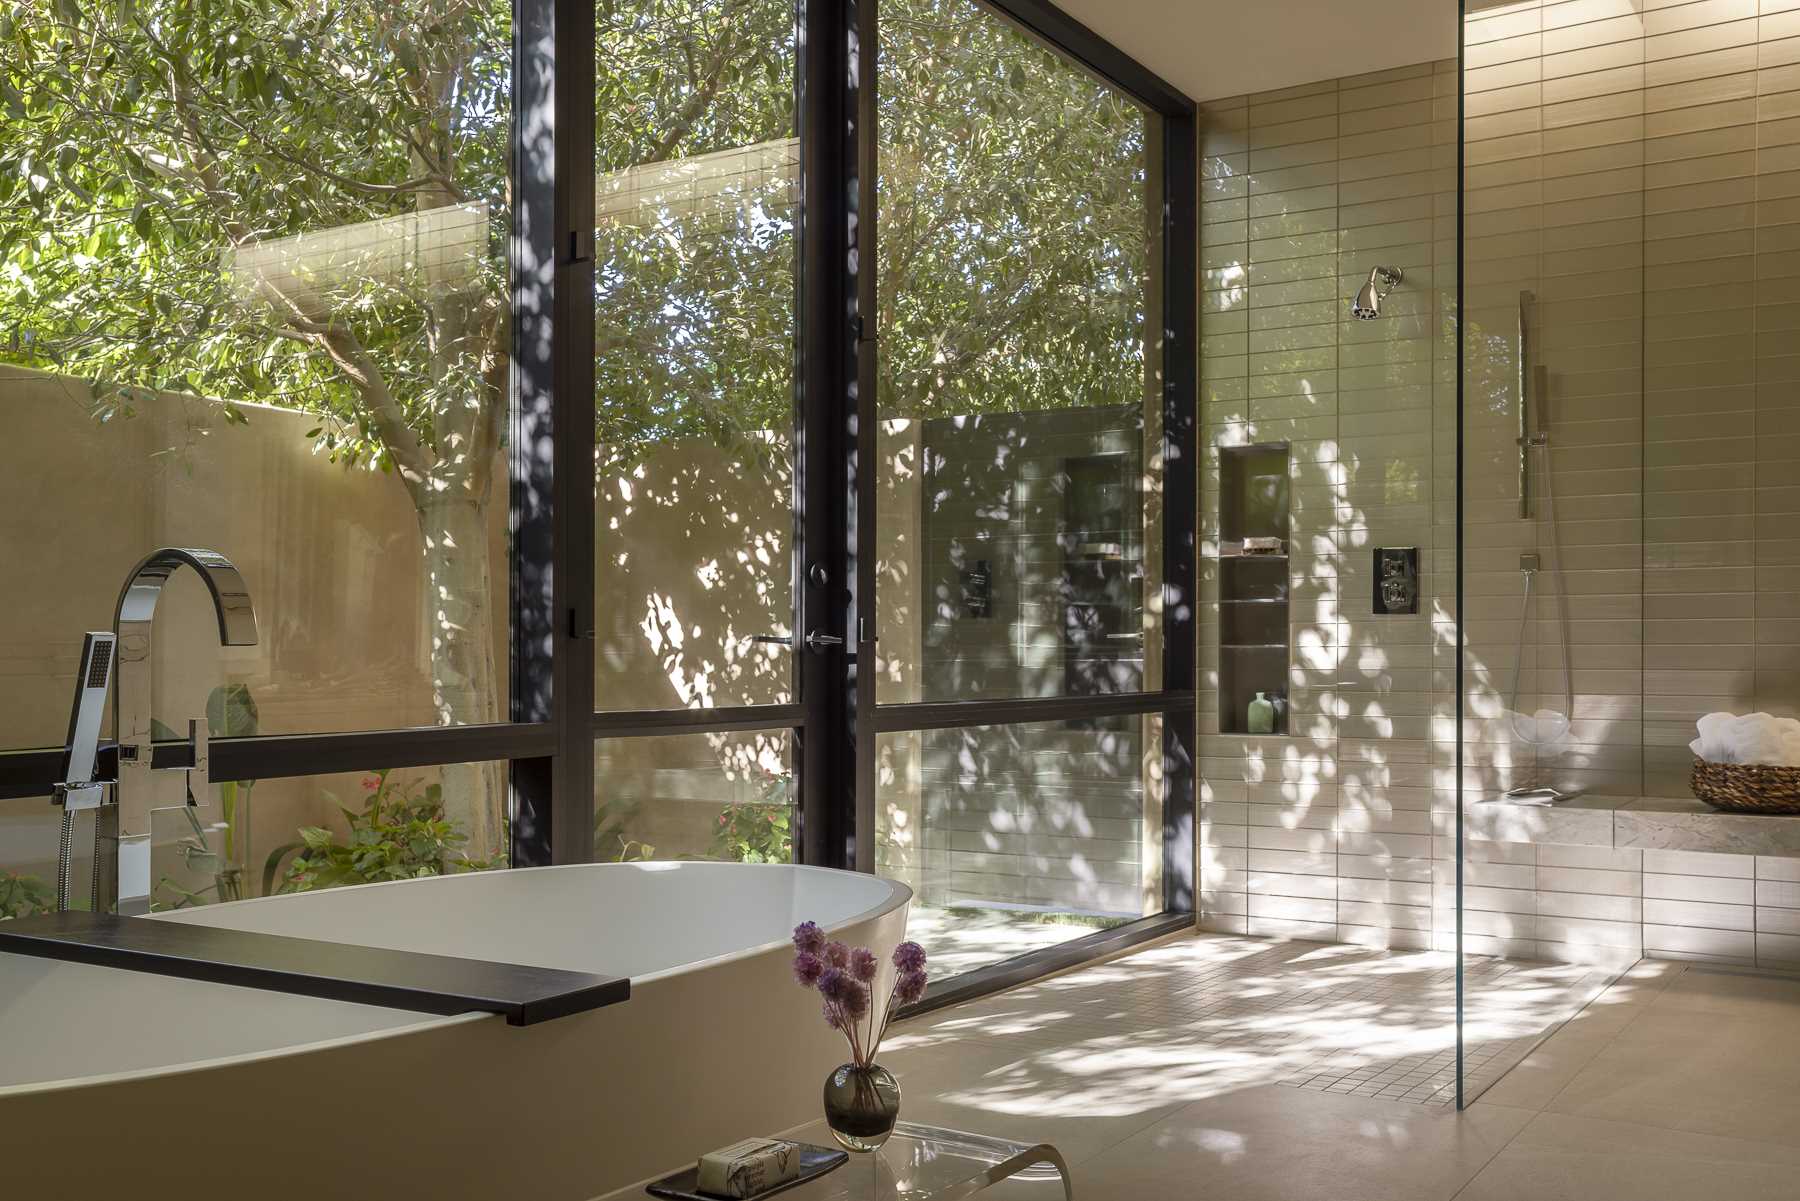 In a bathroom, skylights provide natural light, while the windows frame the tree views from the bath and the shower.